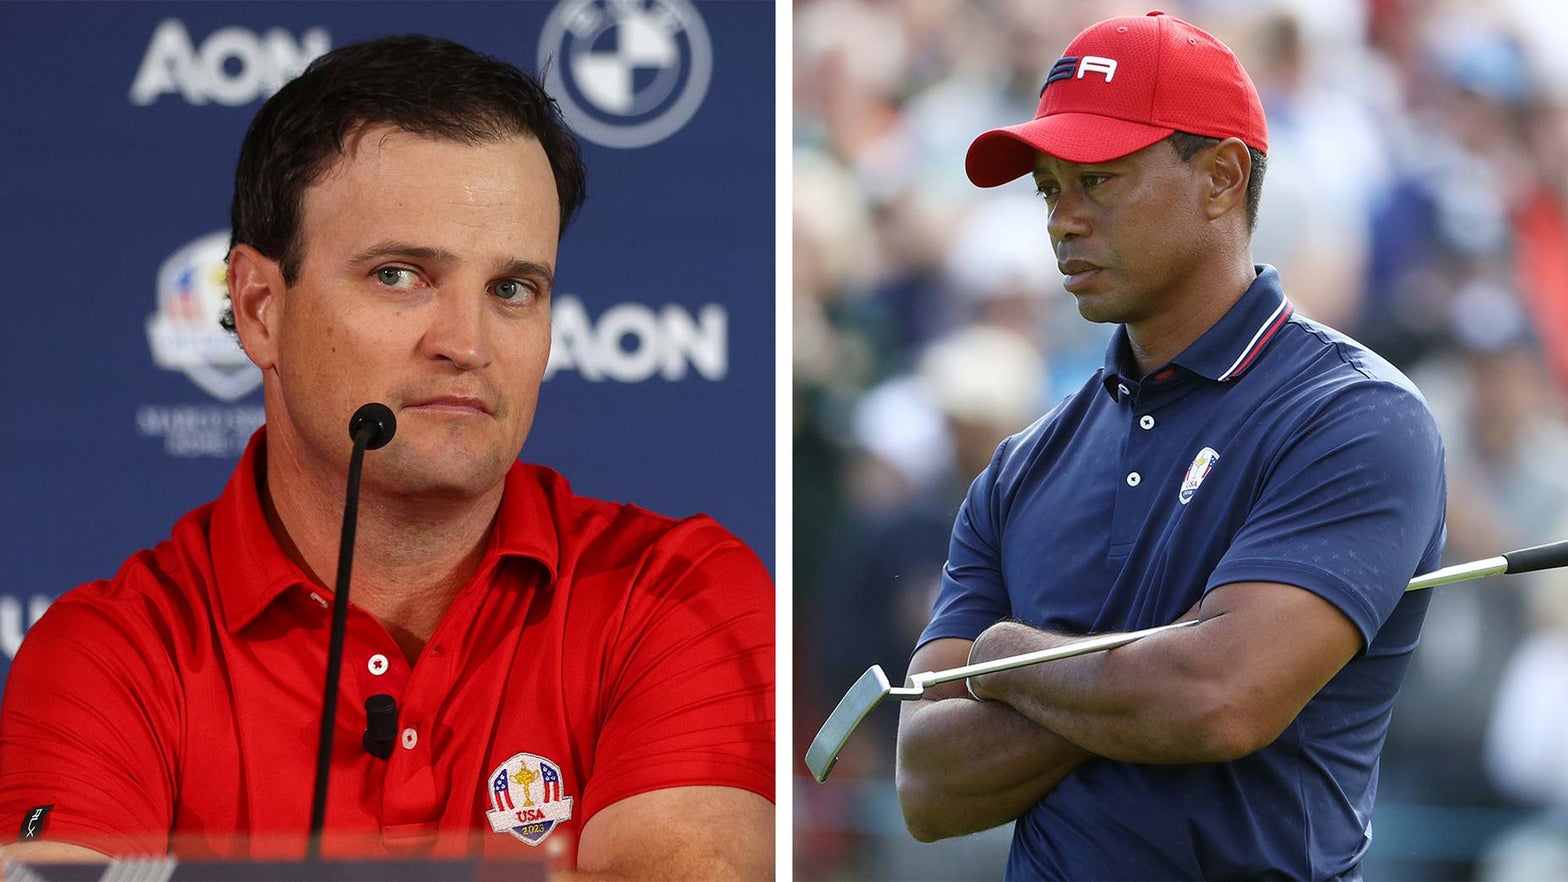 Tiger Woods will be a part of U.S. Ryder Cup team, says Zach Johnson